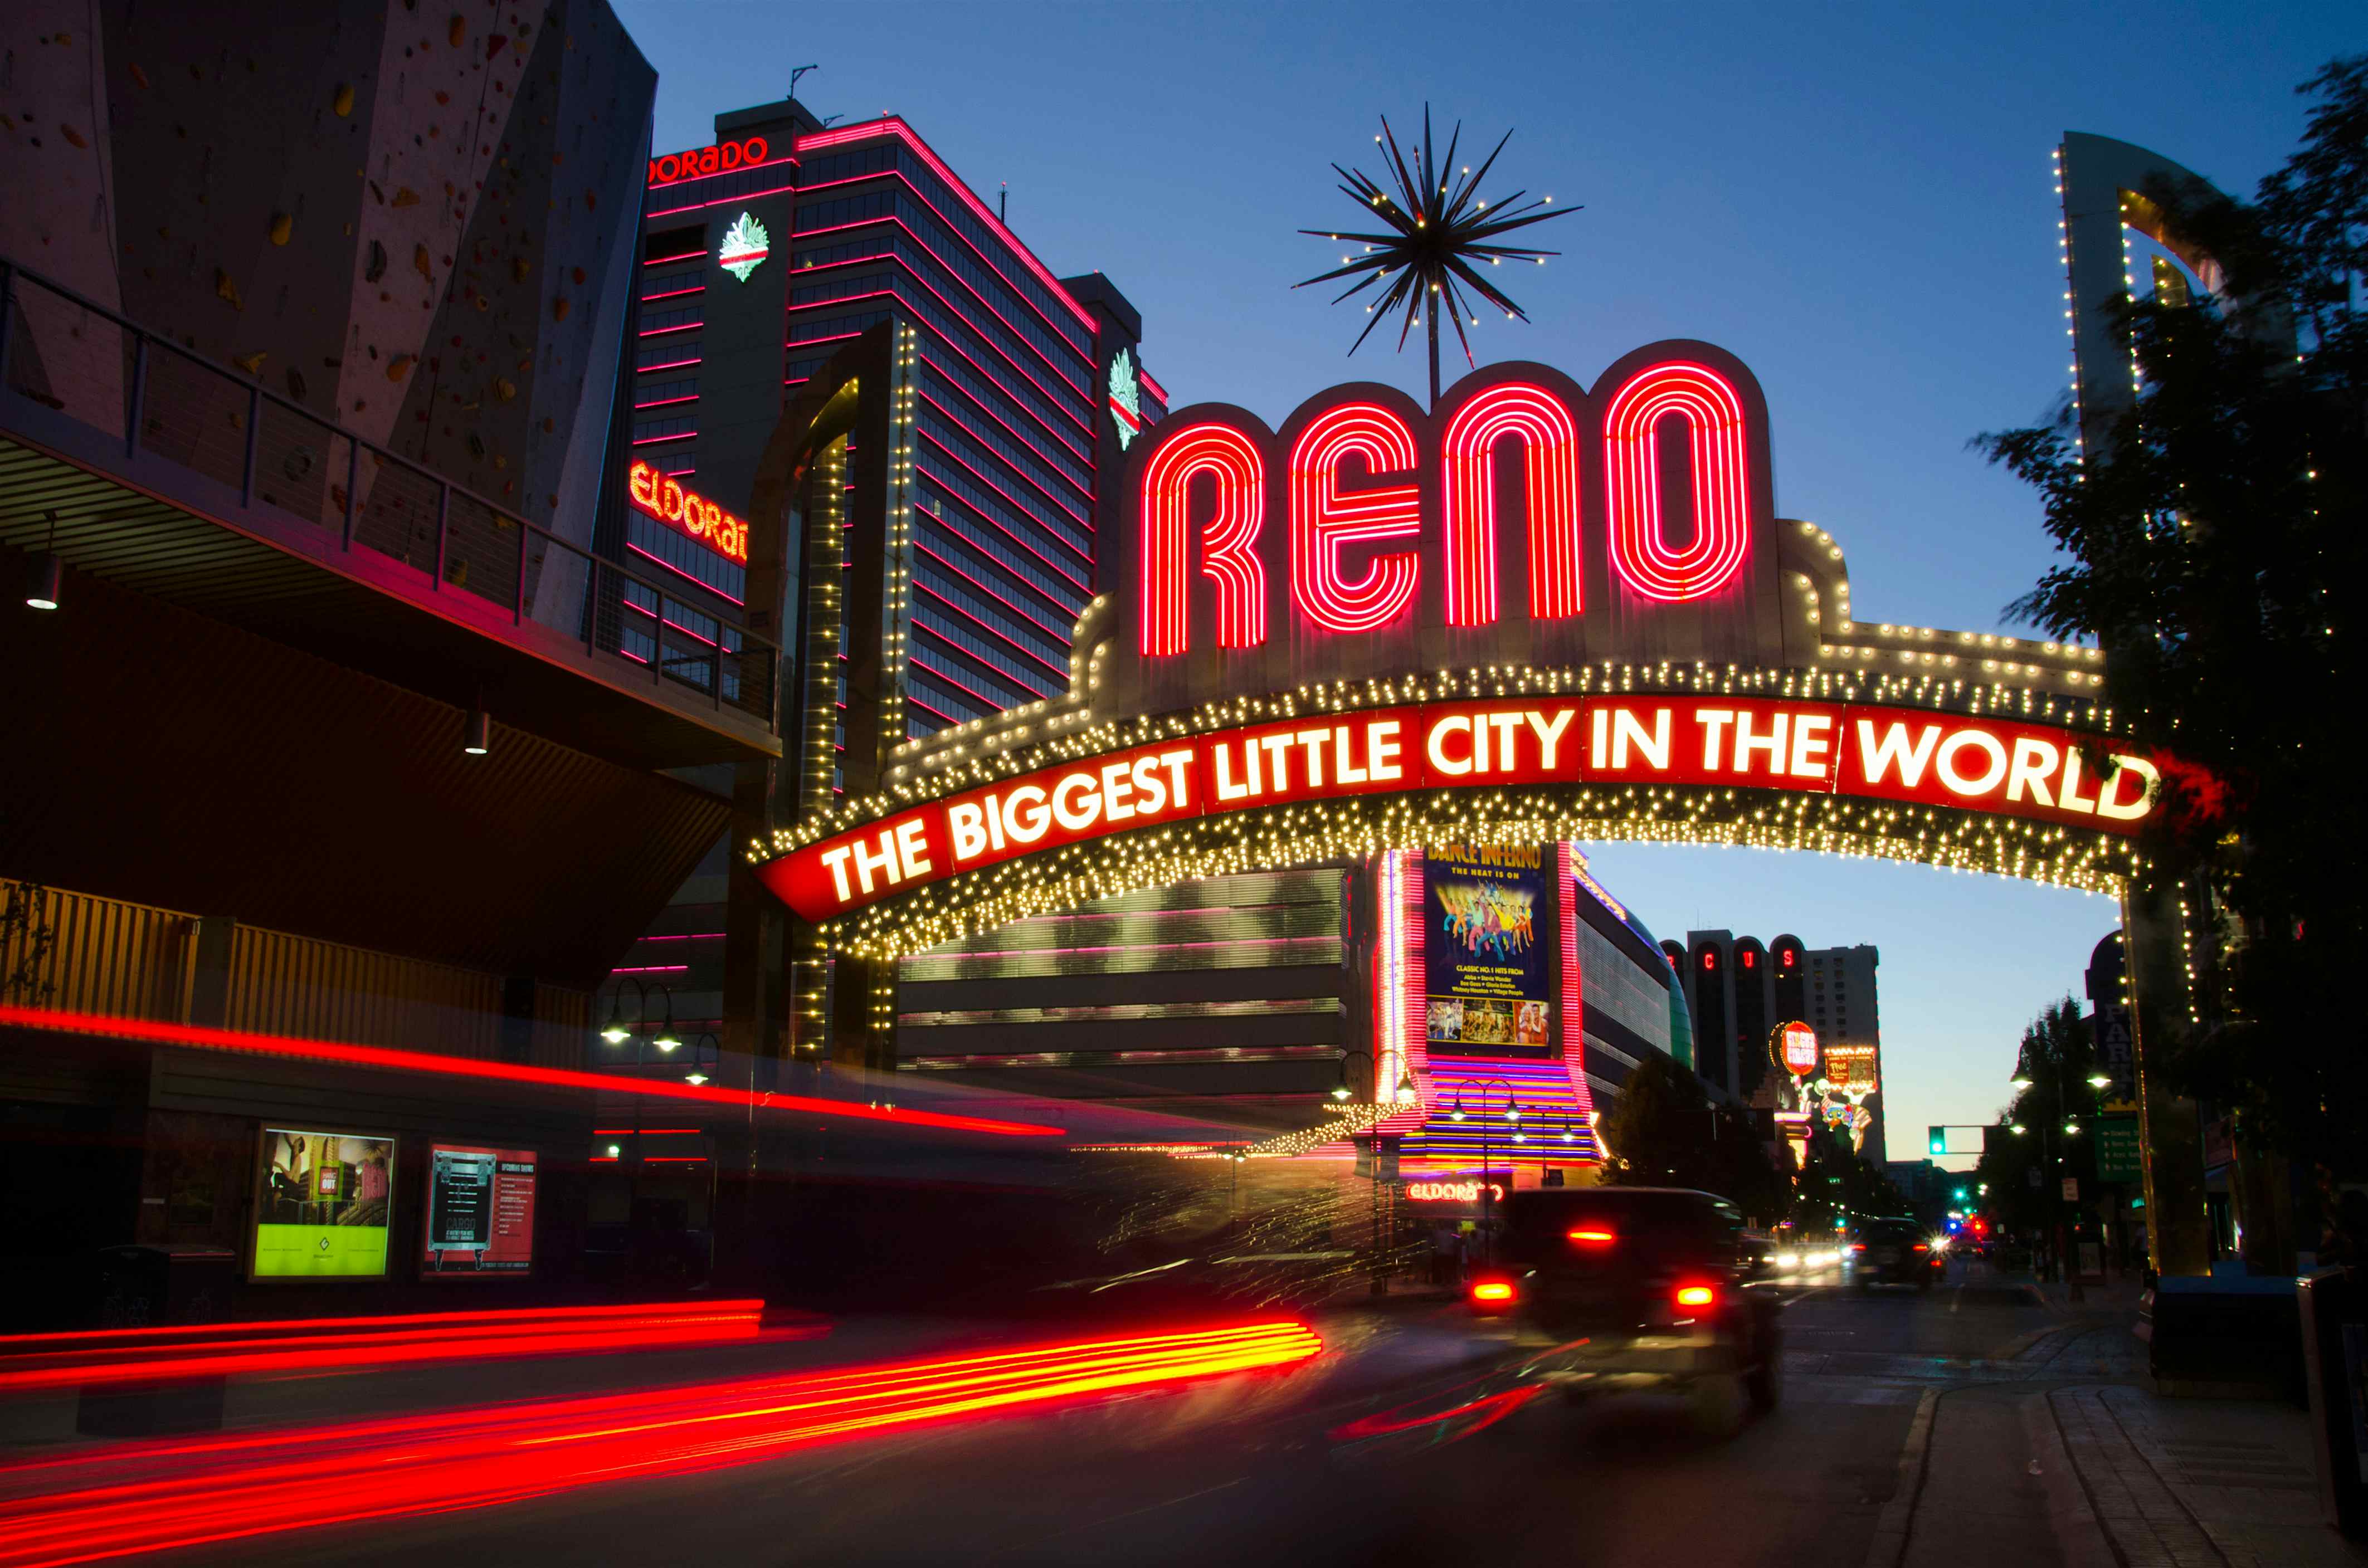 The reinvention of Reno new reasons to visit Nevada's 'Biggest Little